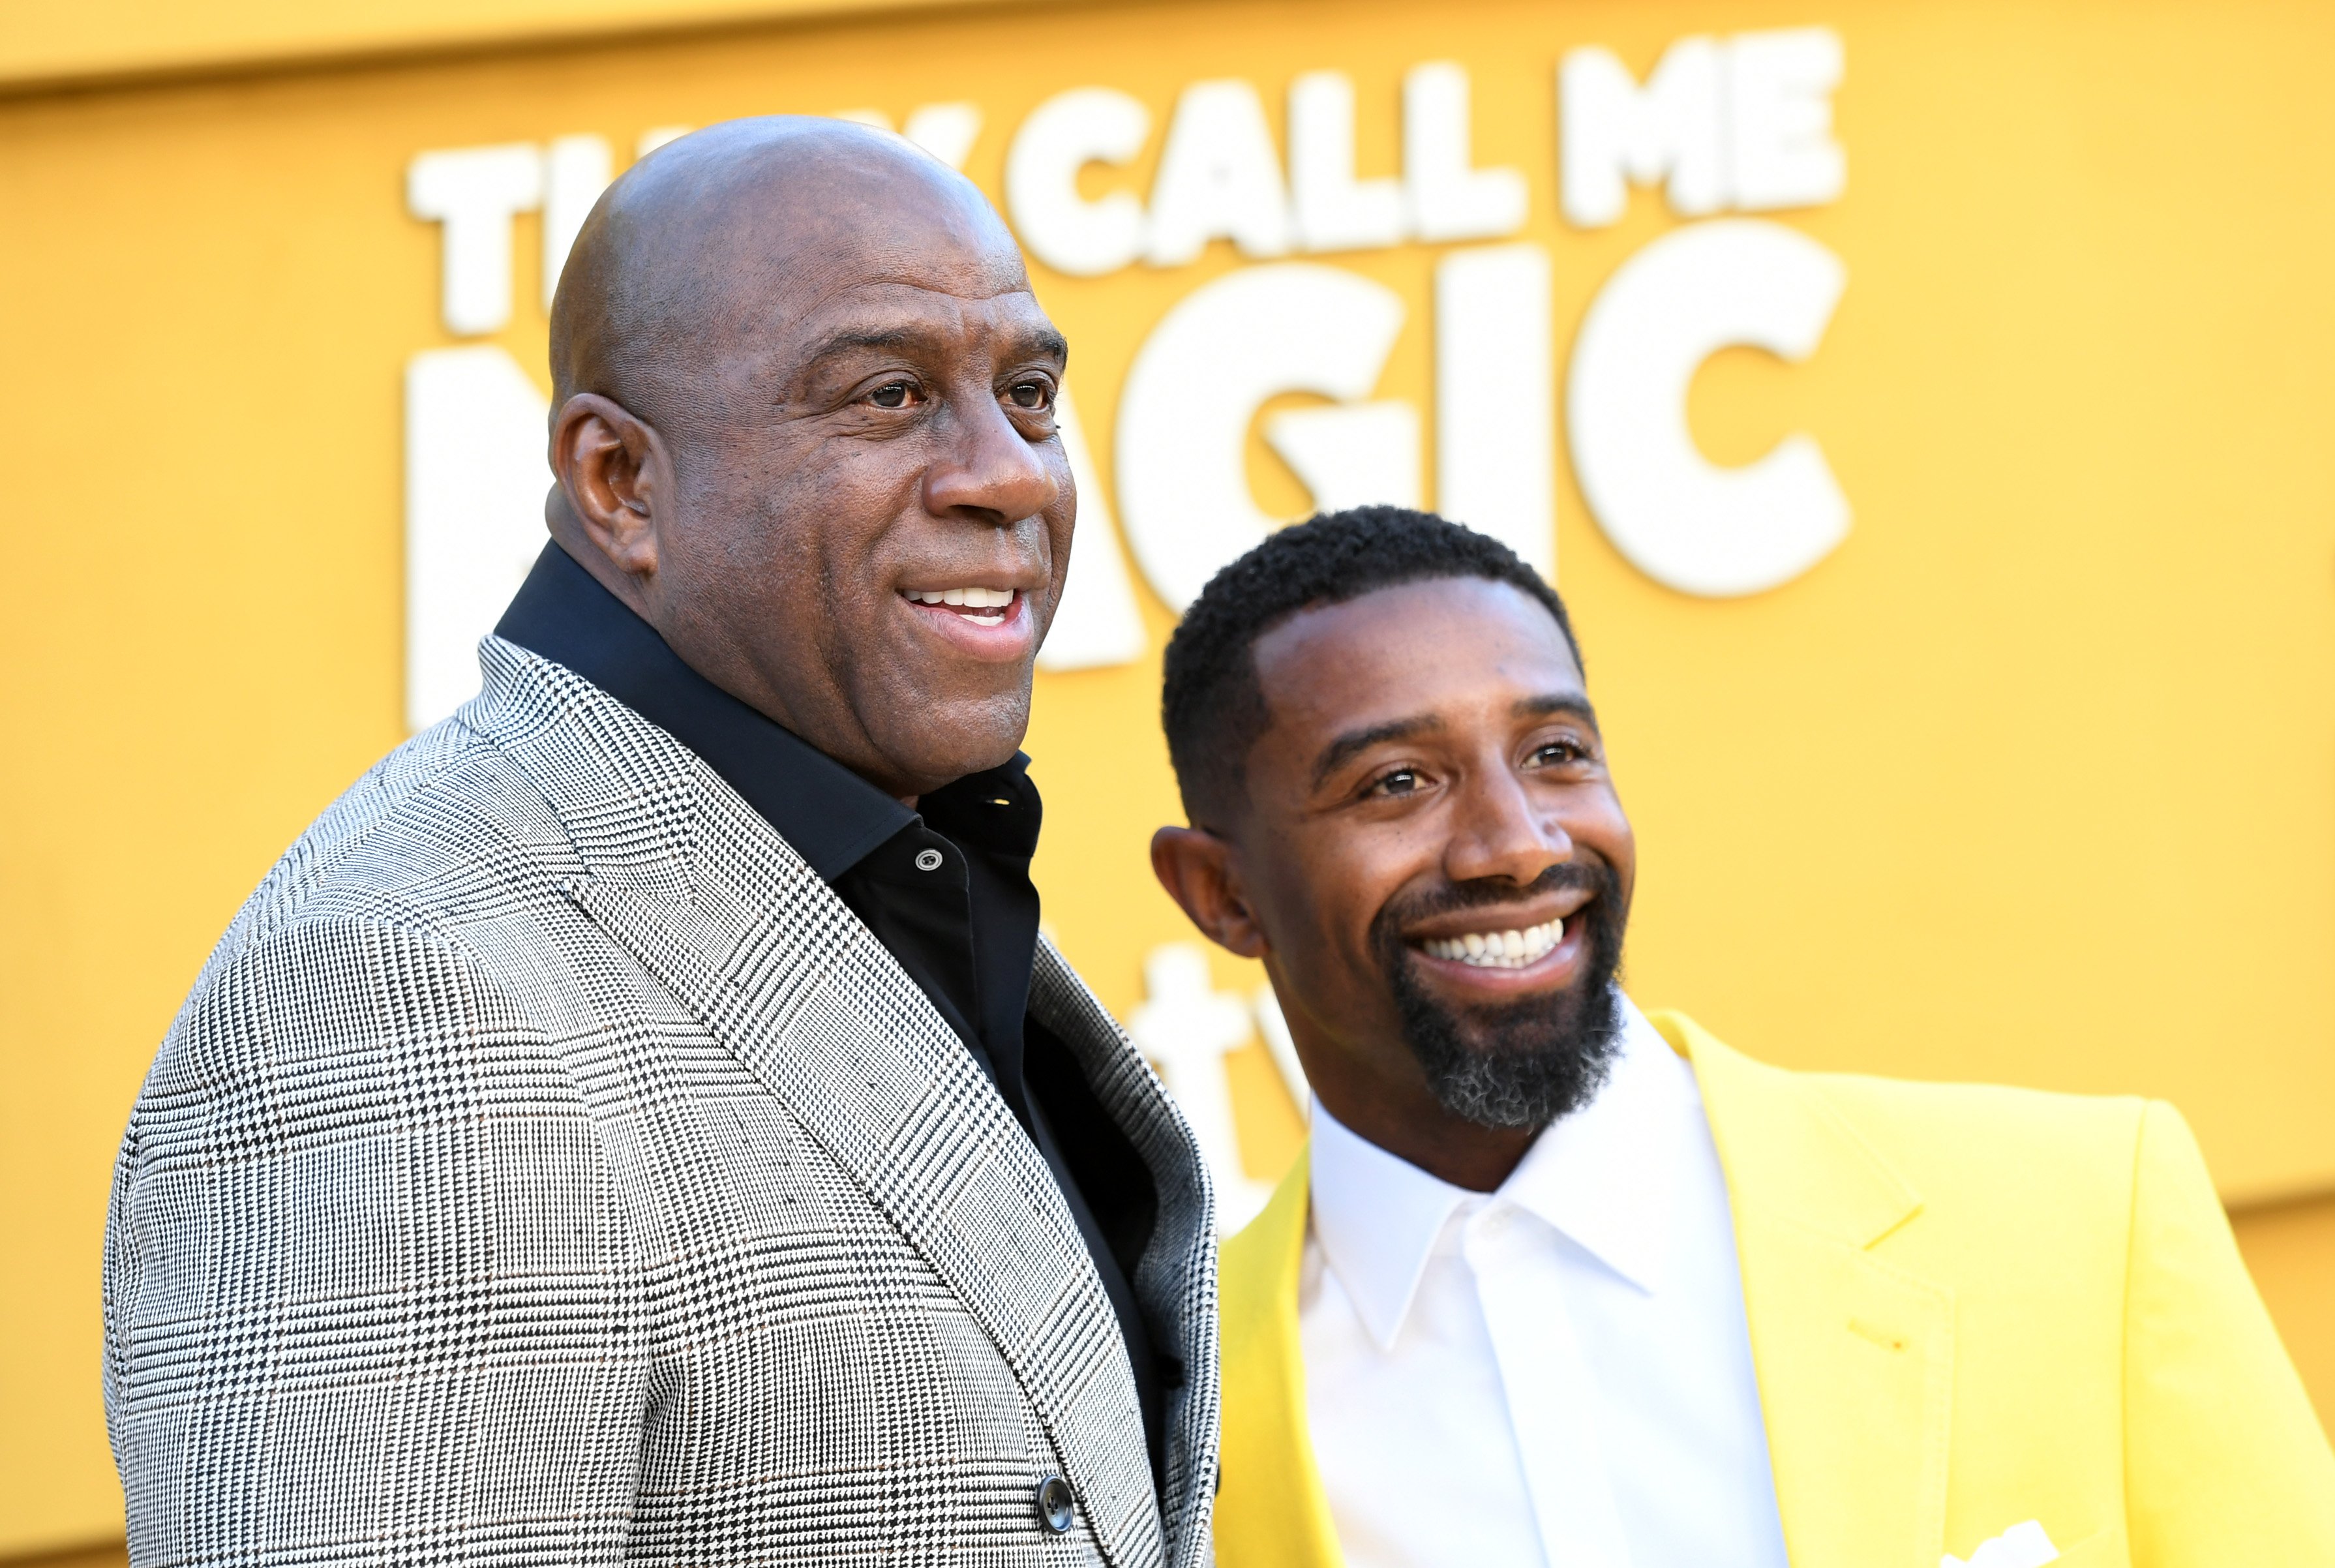 Magic Johnson and Andre Johnson attend the Los Angeles premiere of Apple's "They Call Me Magic" at Regency Village Theatre on April 14, 2022 in Los Angeles, California. | Source: Getty Images